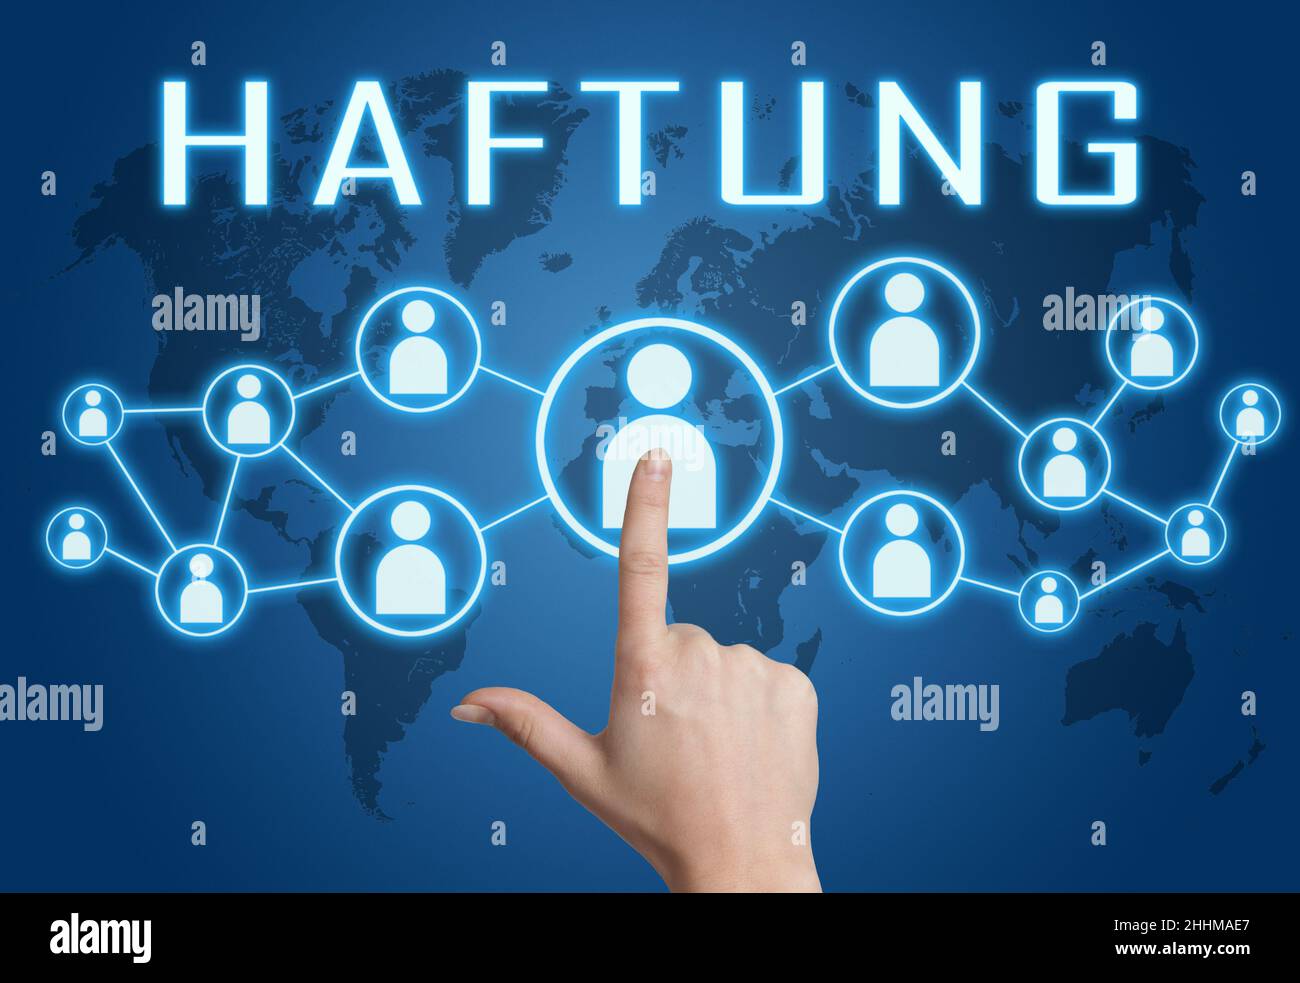 Haftung - german word for liability - text concept with hand pressing social icons on blue world map background. Stock Photo